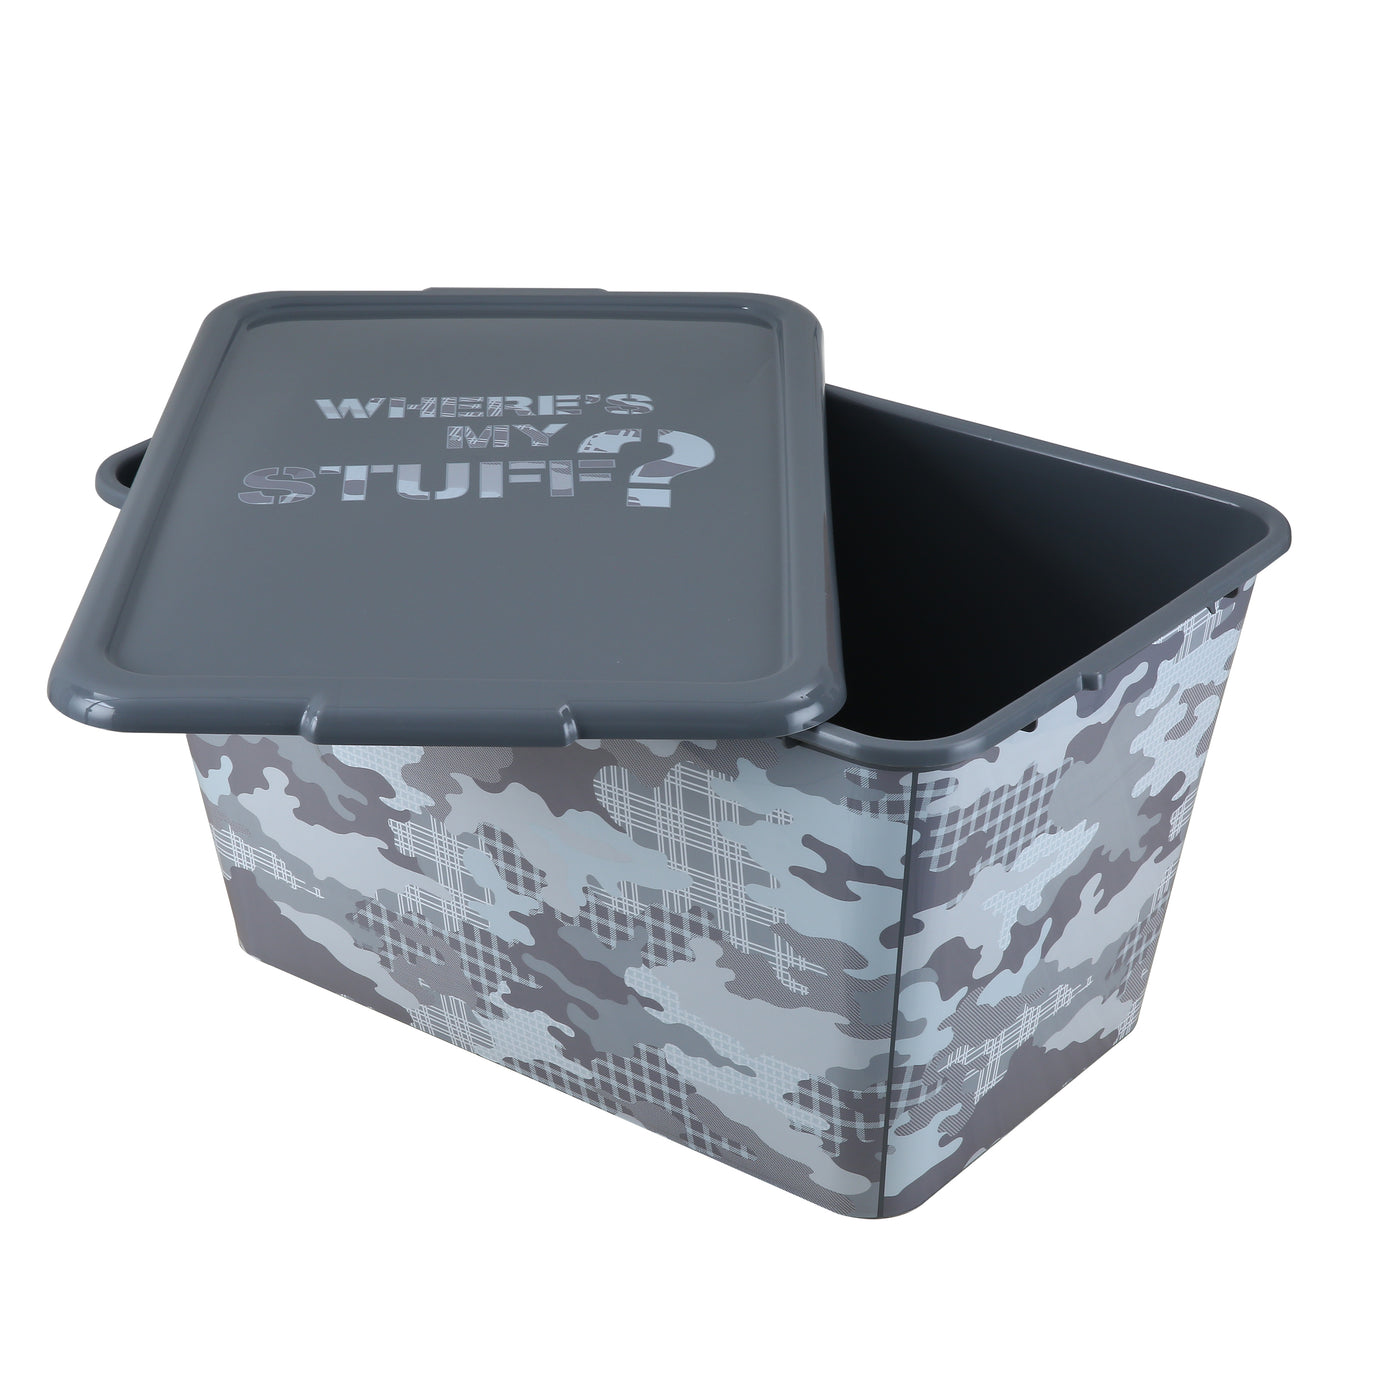 SimplyKleen 14.5-gal. Themed Storage Container Bins with Lids (Pack of 4)